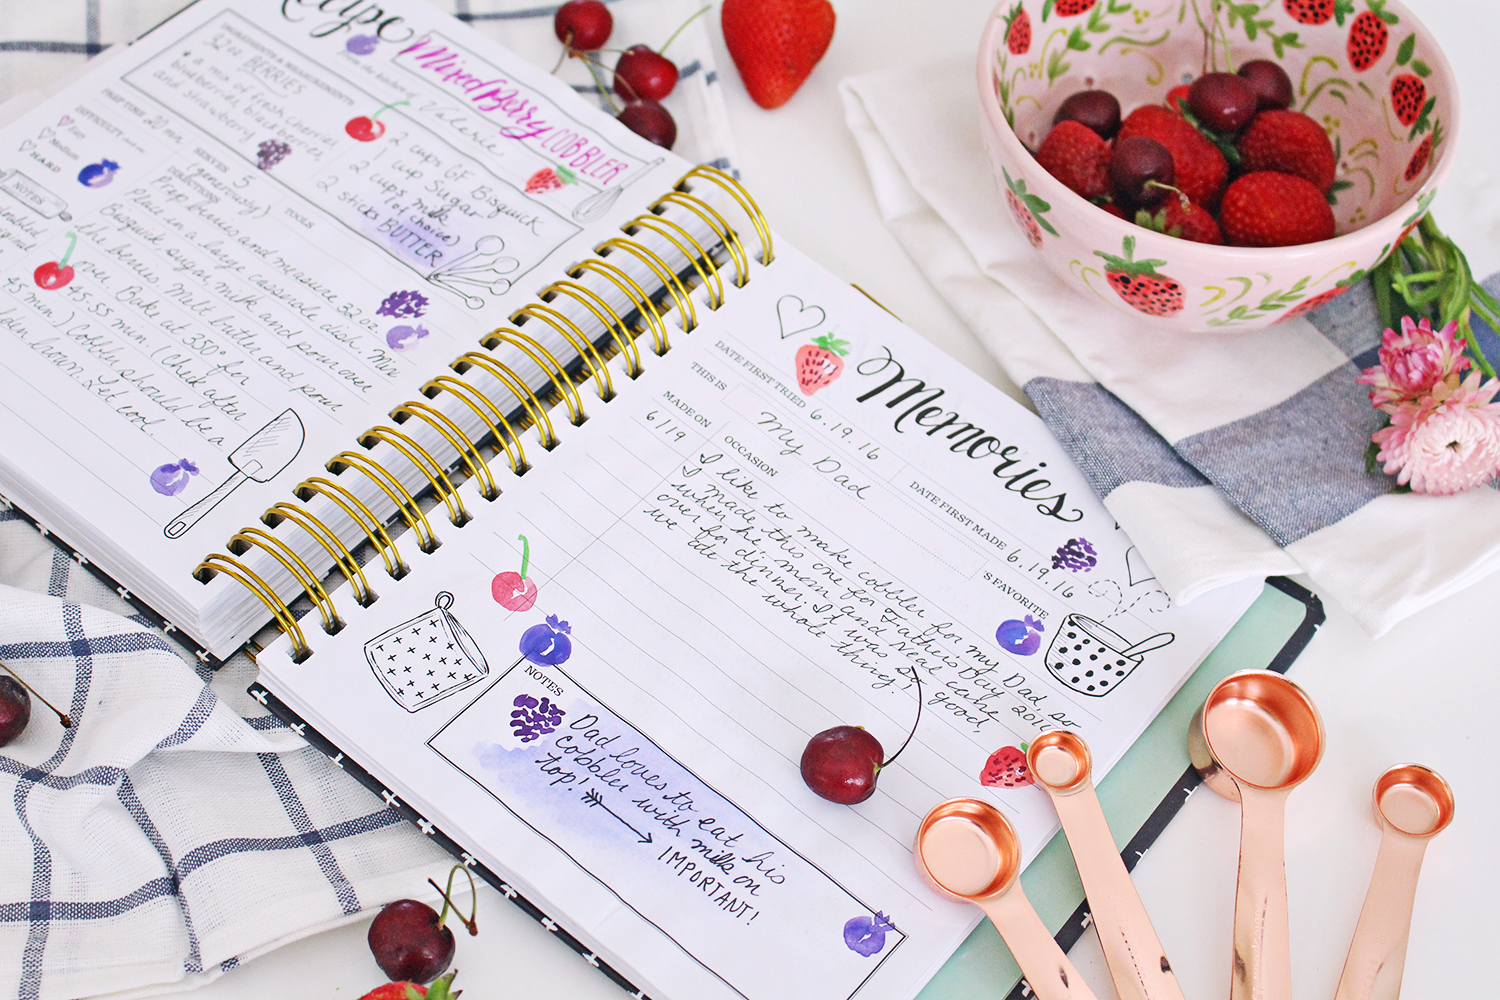 The Keepsake Kitchen Diary is a perfect for recording family recipes in a creative, scrapbooked way